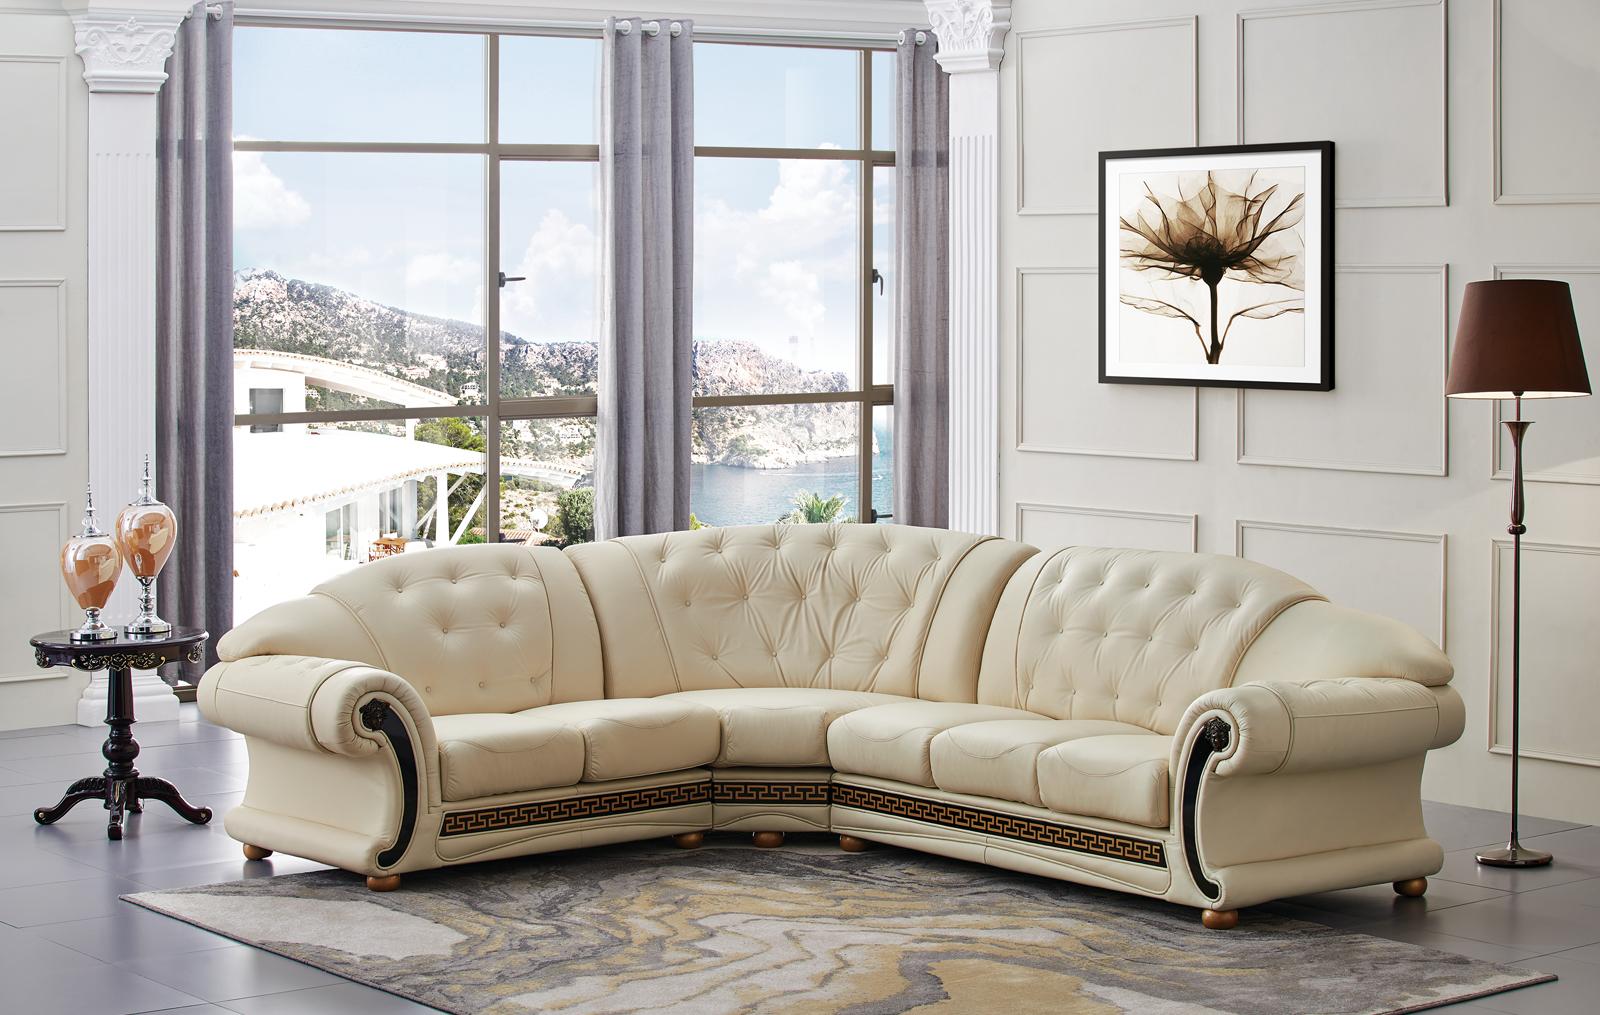 Classic Sectional Sofa Anais Anais LHC in Ivory Leather